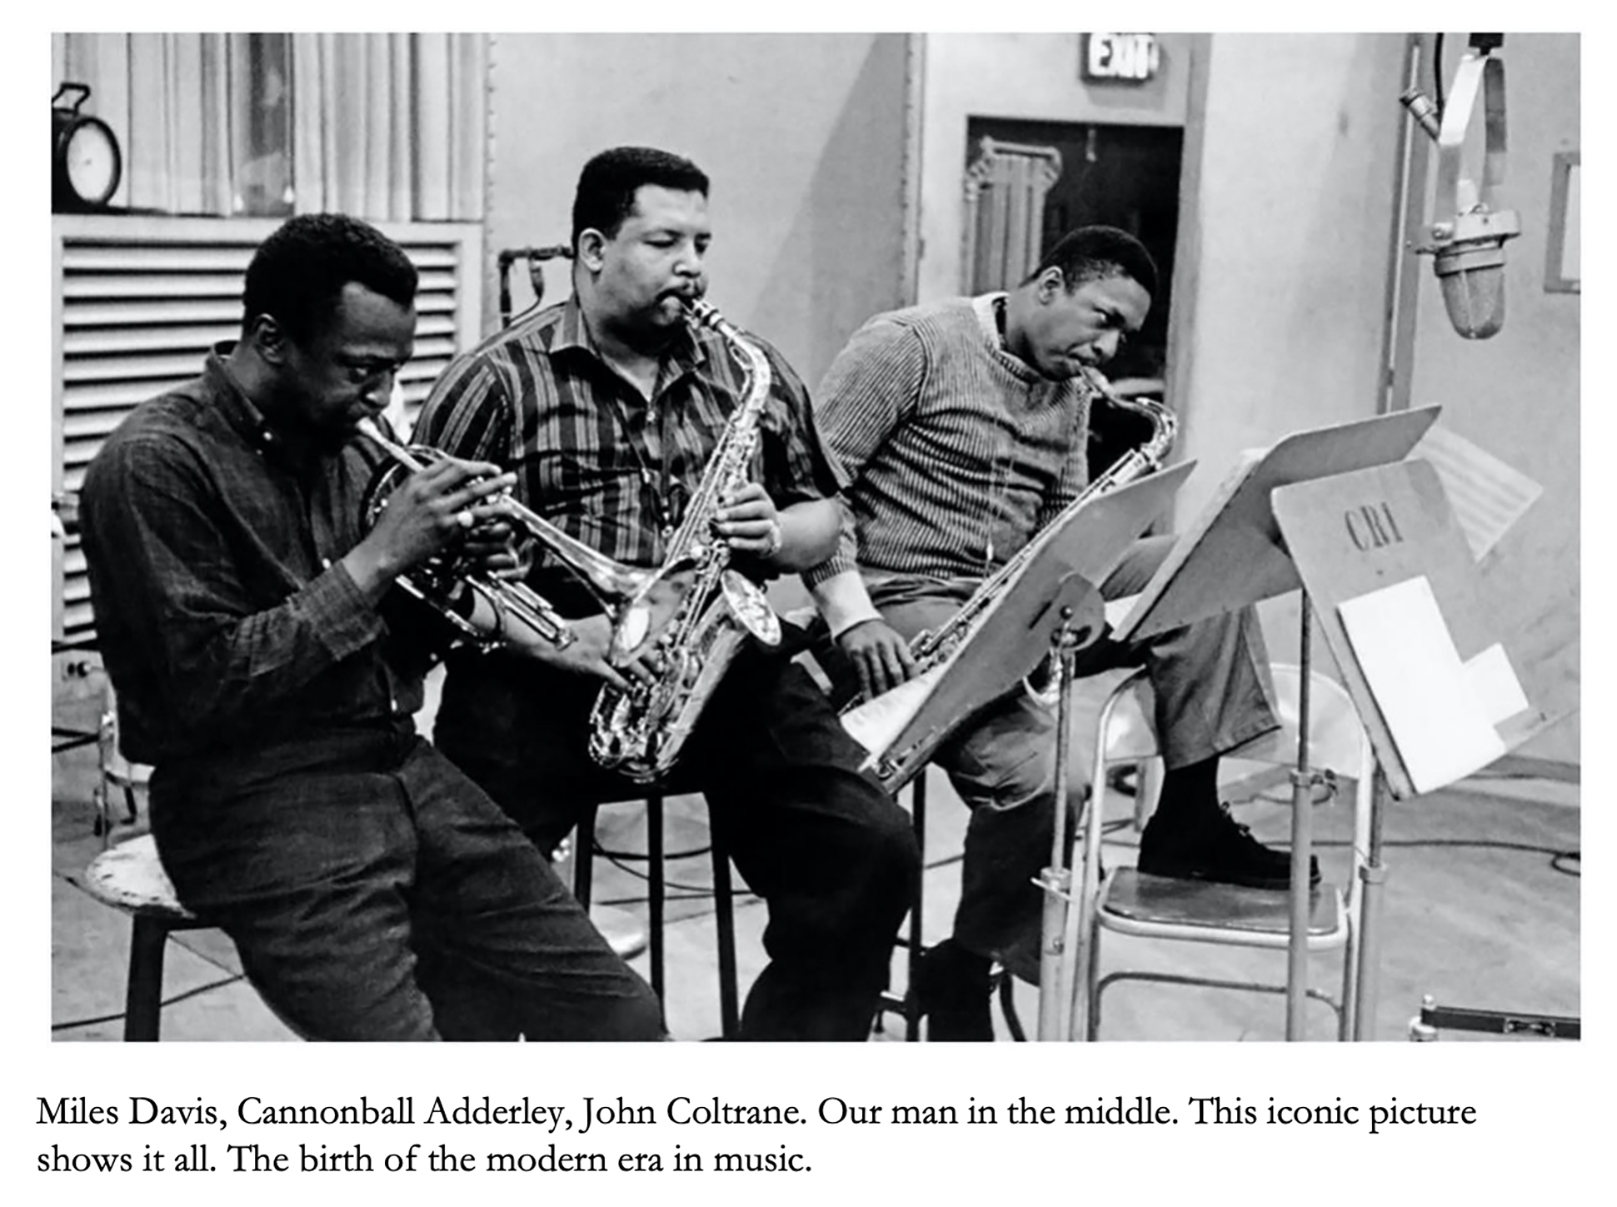 Miles Davis, Cannonball Adderly, John Coltrane. Our man in the middle. This iconic picture shows it all. The birth of the modern era in music.